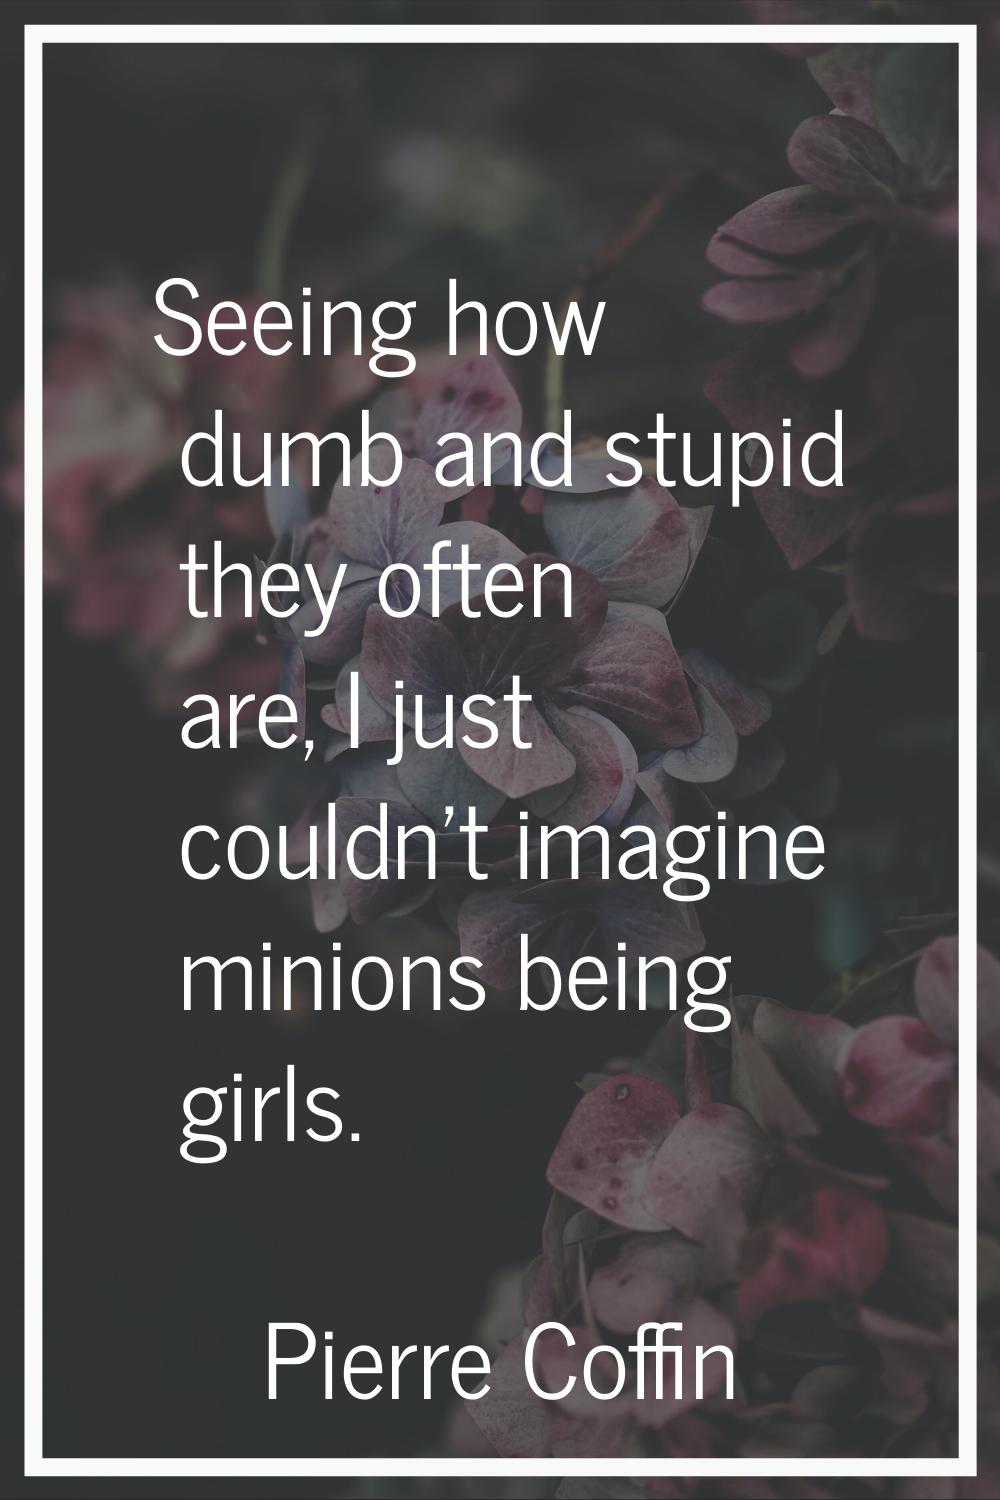 Seeing how dumb and stupid they often are, I just couldn't imagine minions being girls.